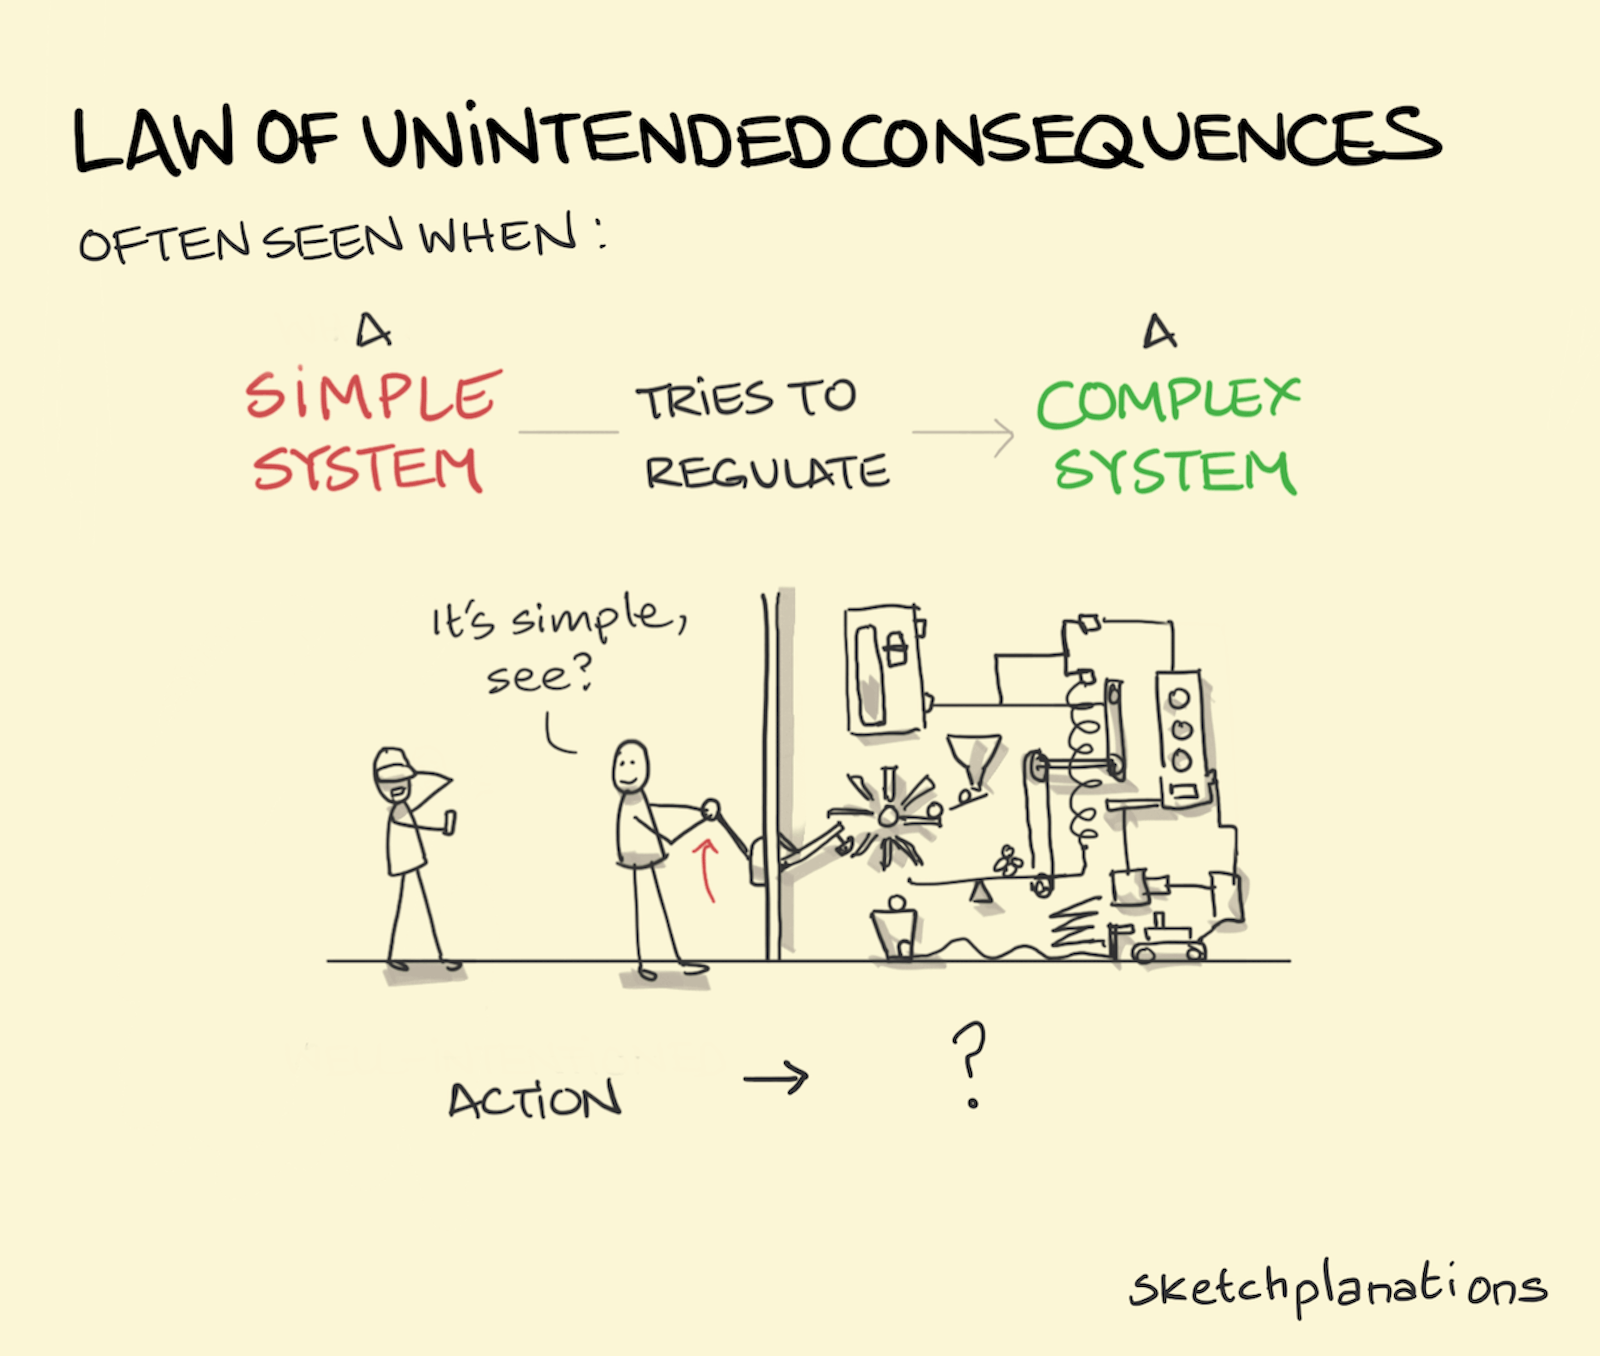 The law of unintended consequences - Sketchplanations